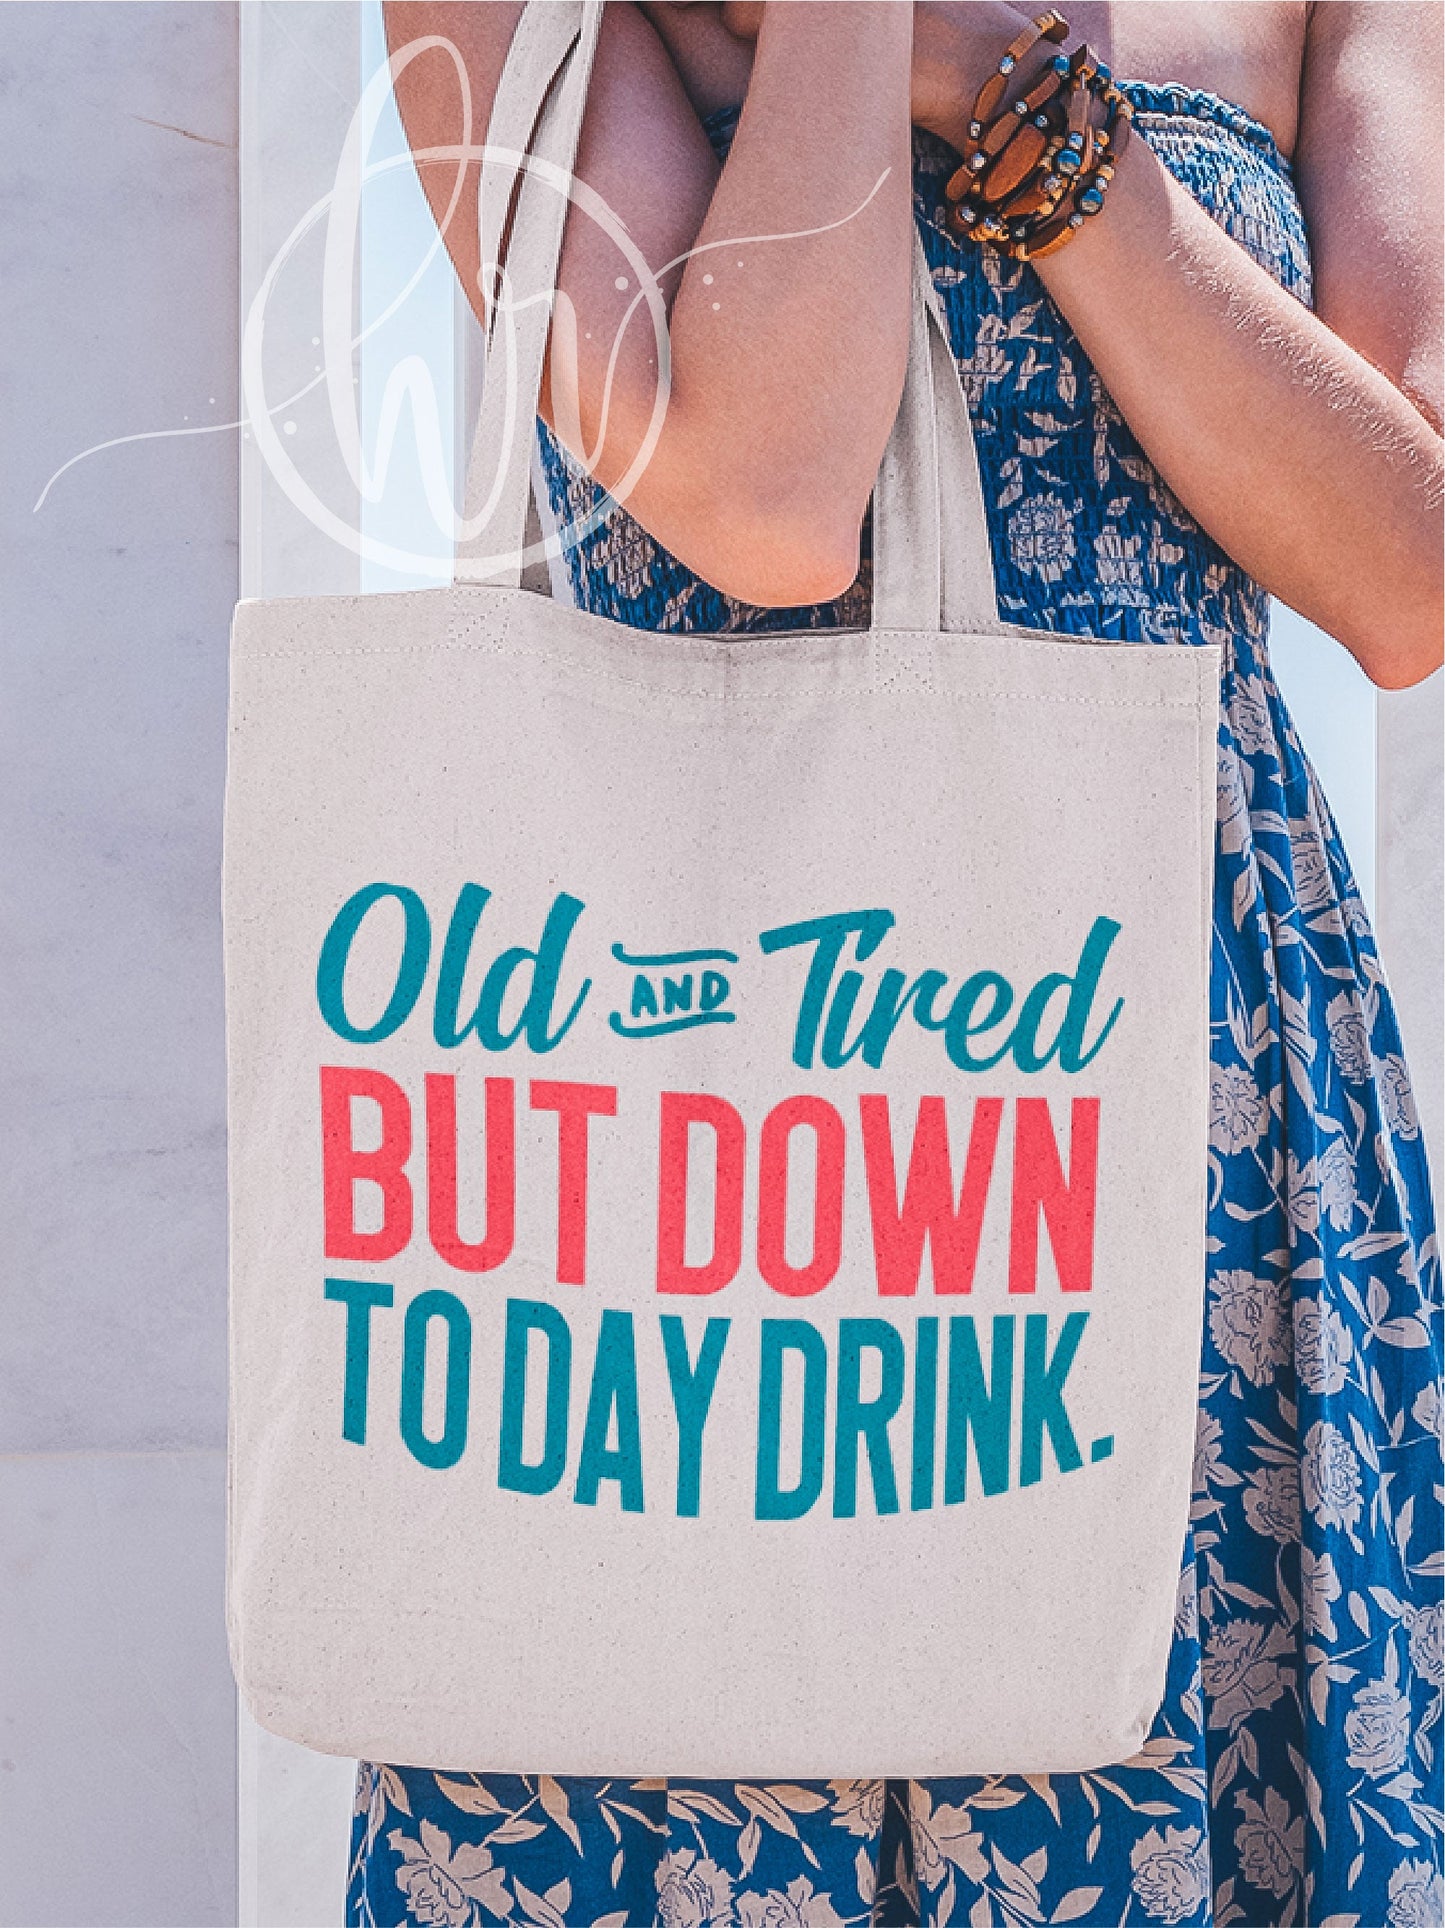 Old And Tired But Down To Day Drink Tote Bag